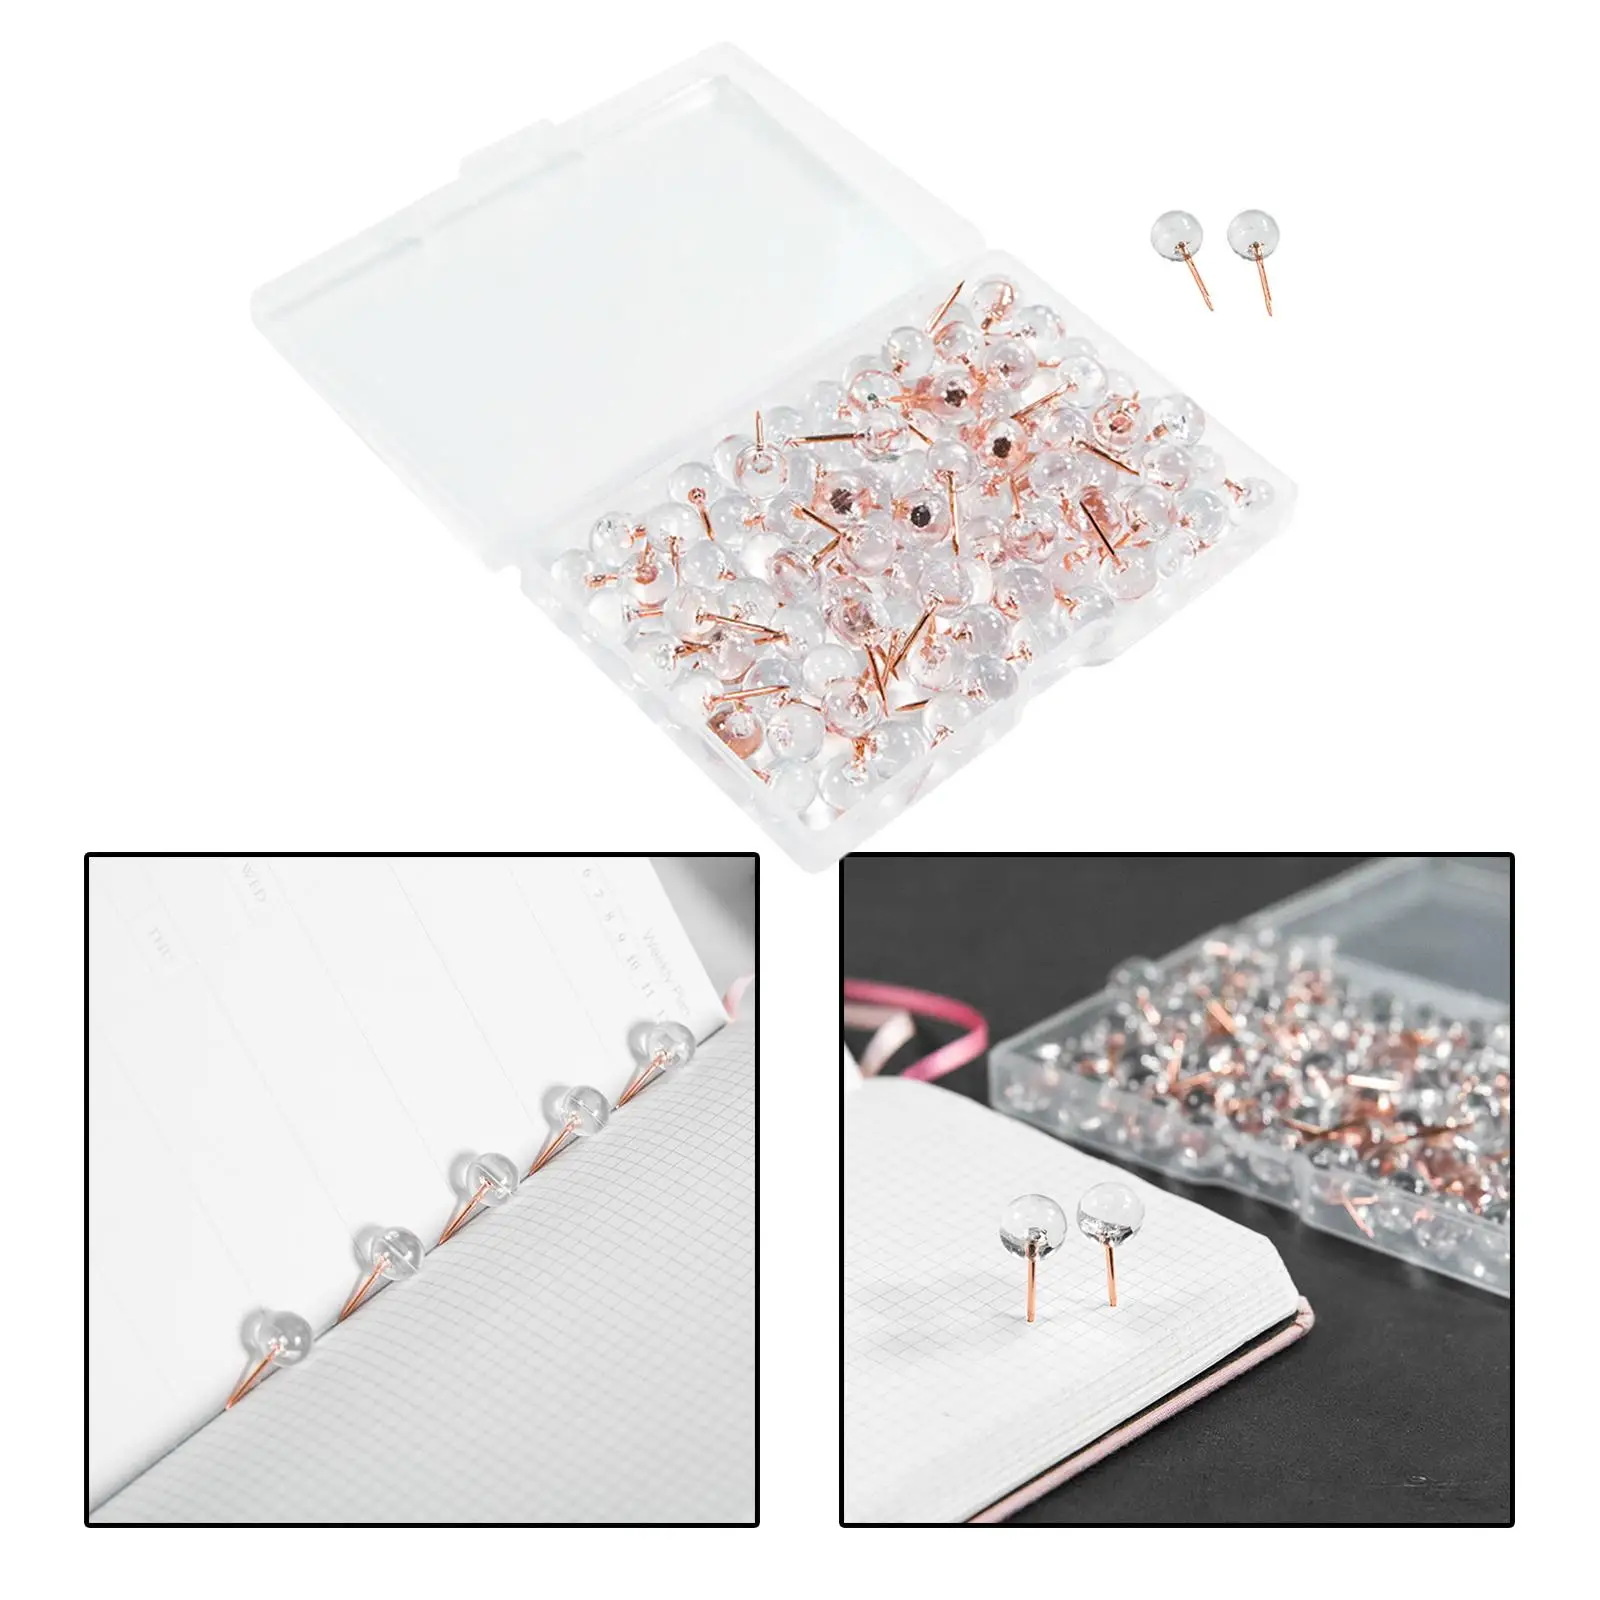 Push Pins - 100 Pack Tacks Acrylic Head with for Cork Bulletin Board, Picture Hanging